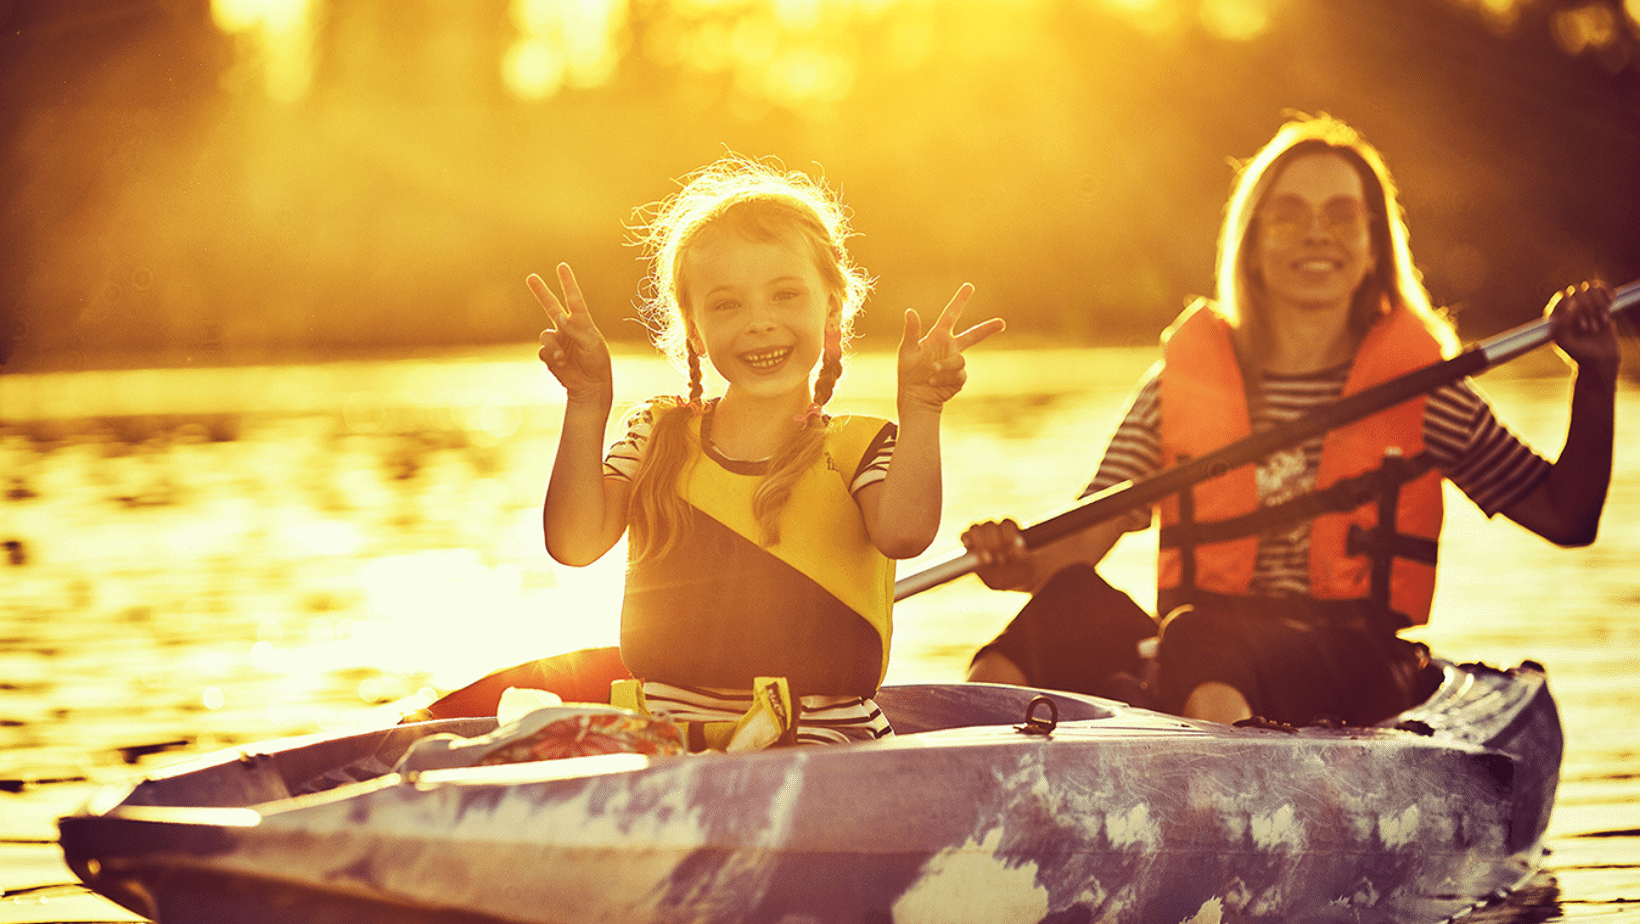 12 Fun Camping Activities to Do with Your Family